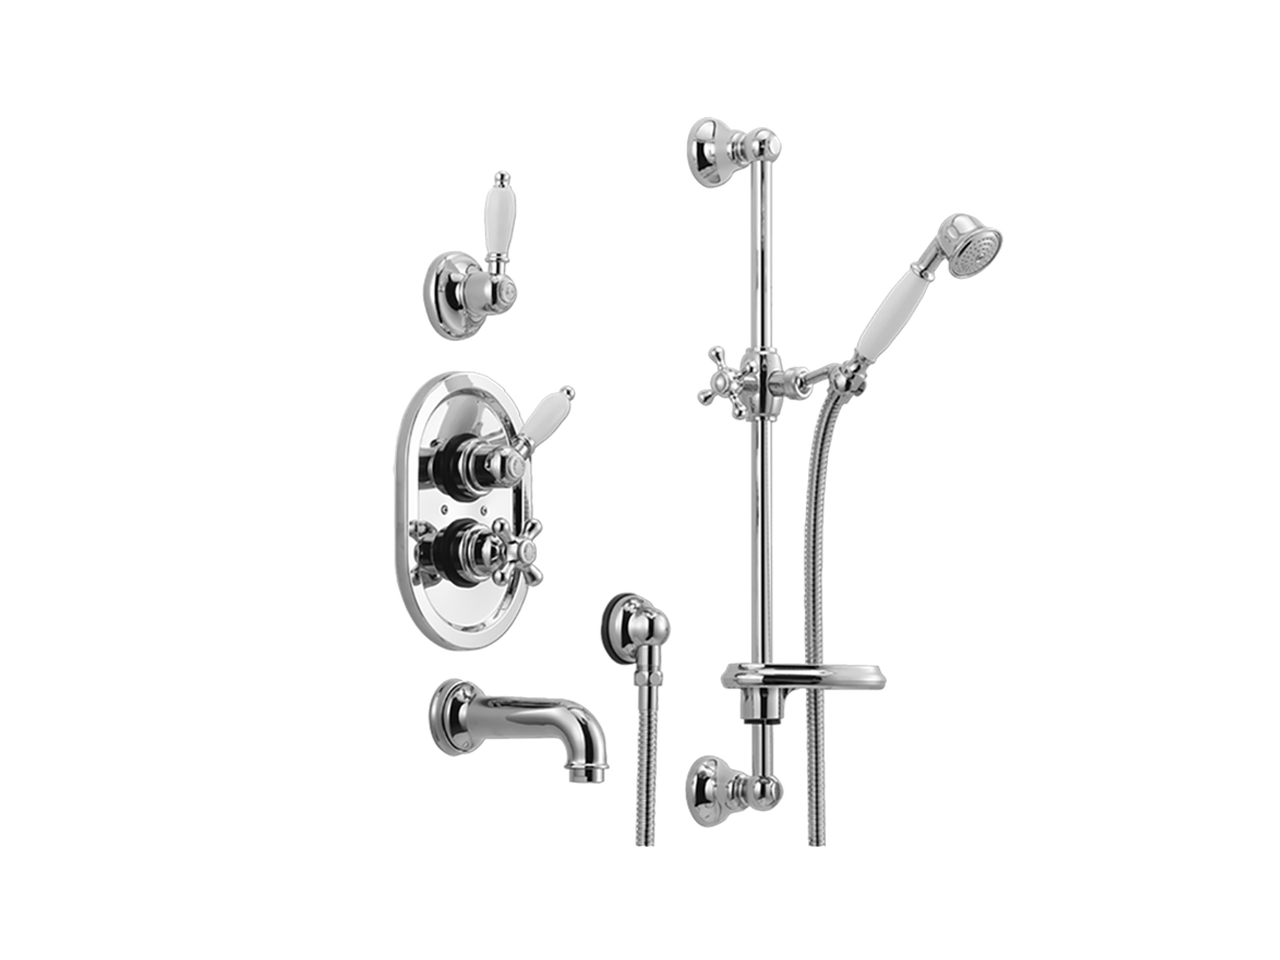 Concealed thermostatic bath mixer CROISETTE - v1